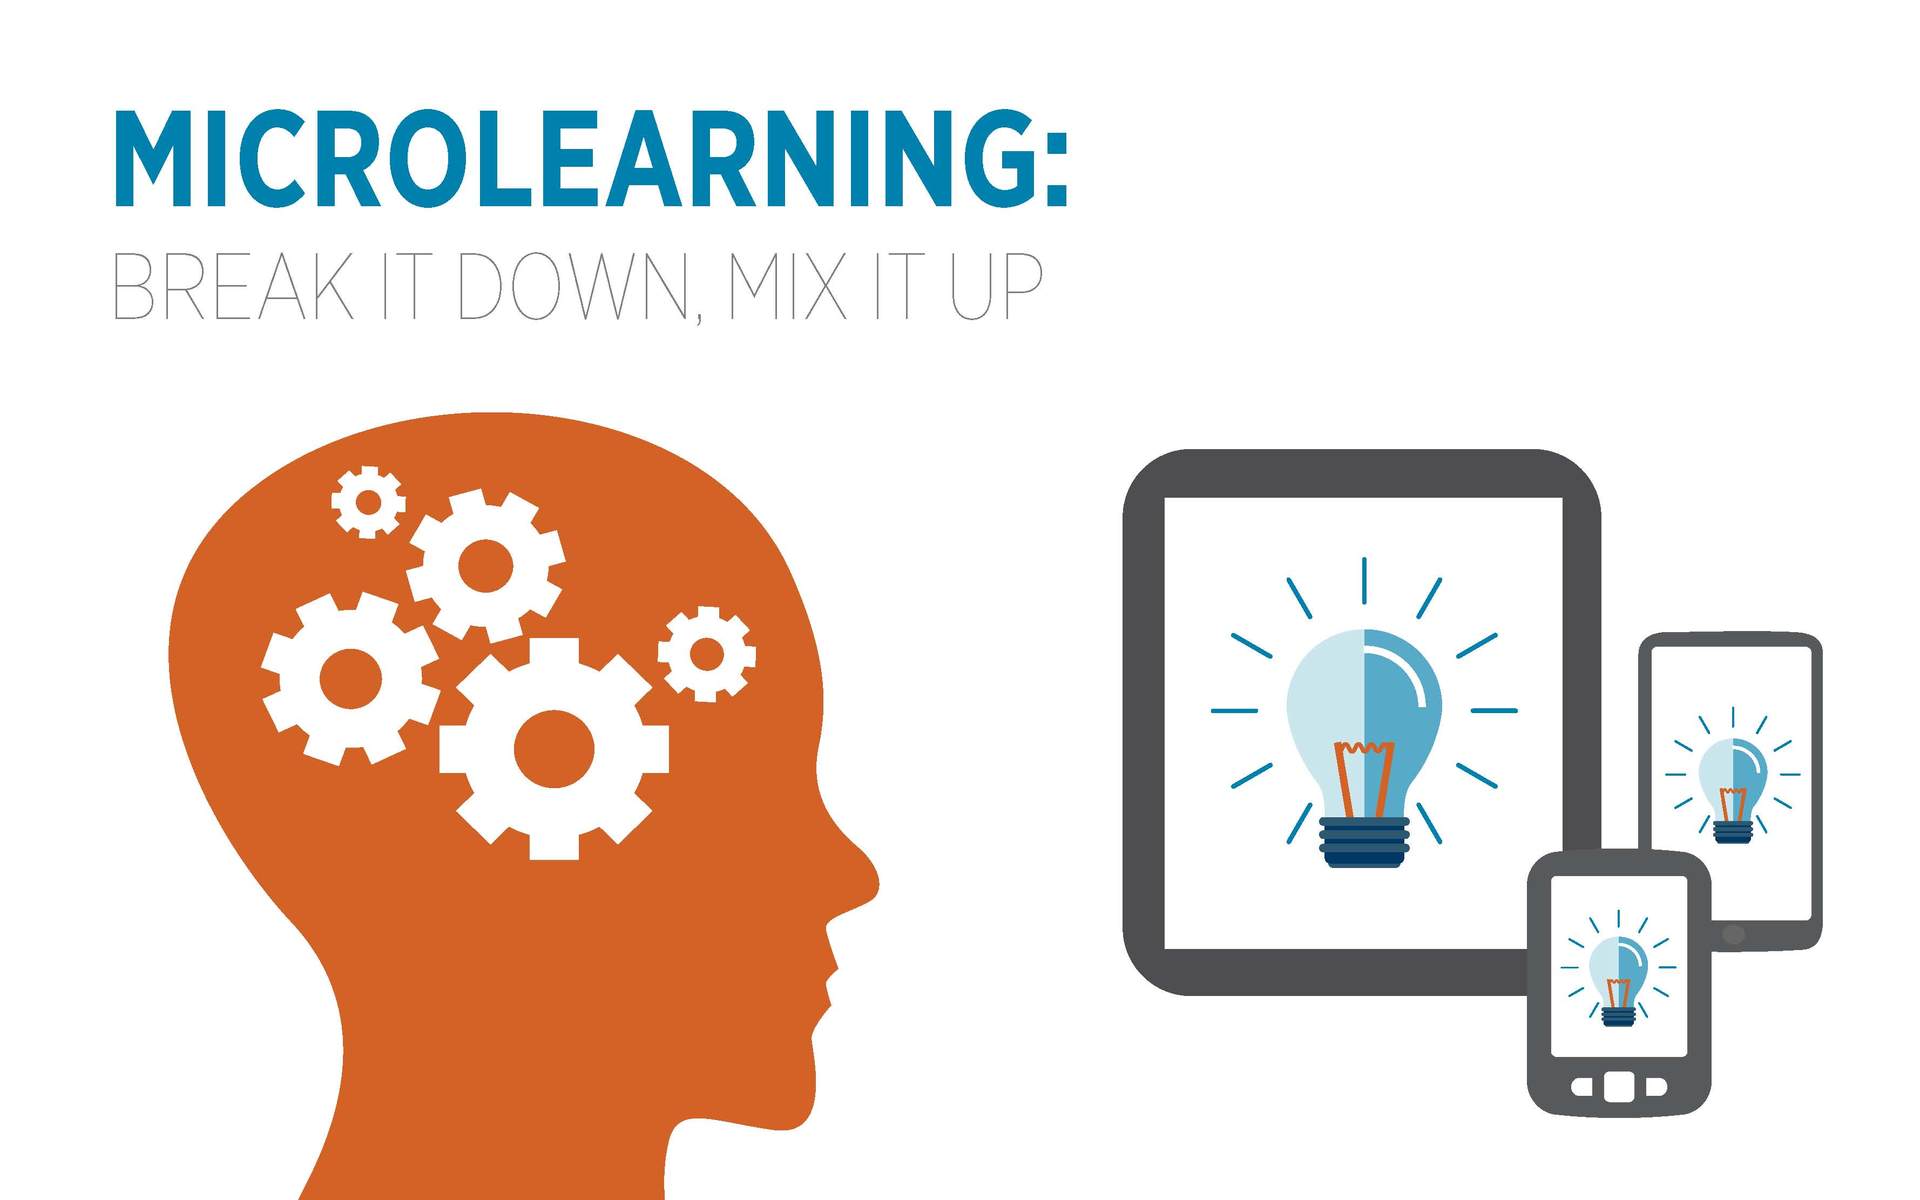 Microlearning Breaks Down Training To Build It Up